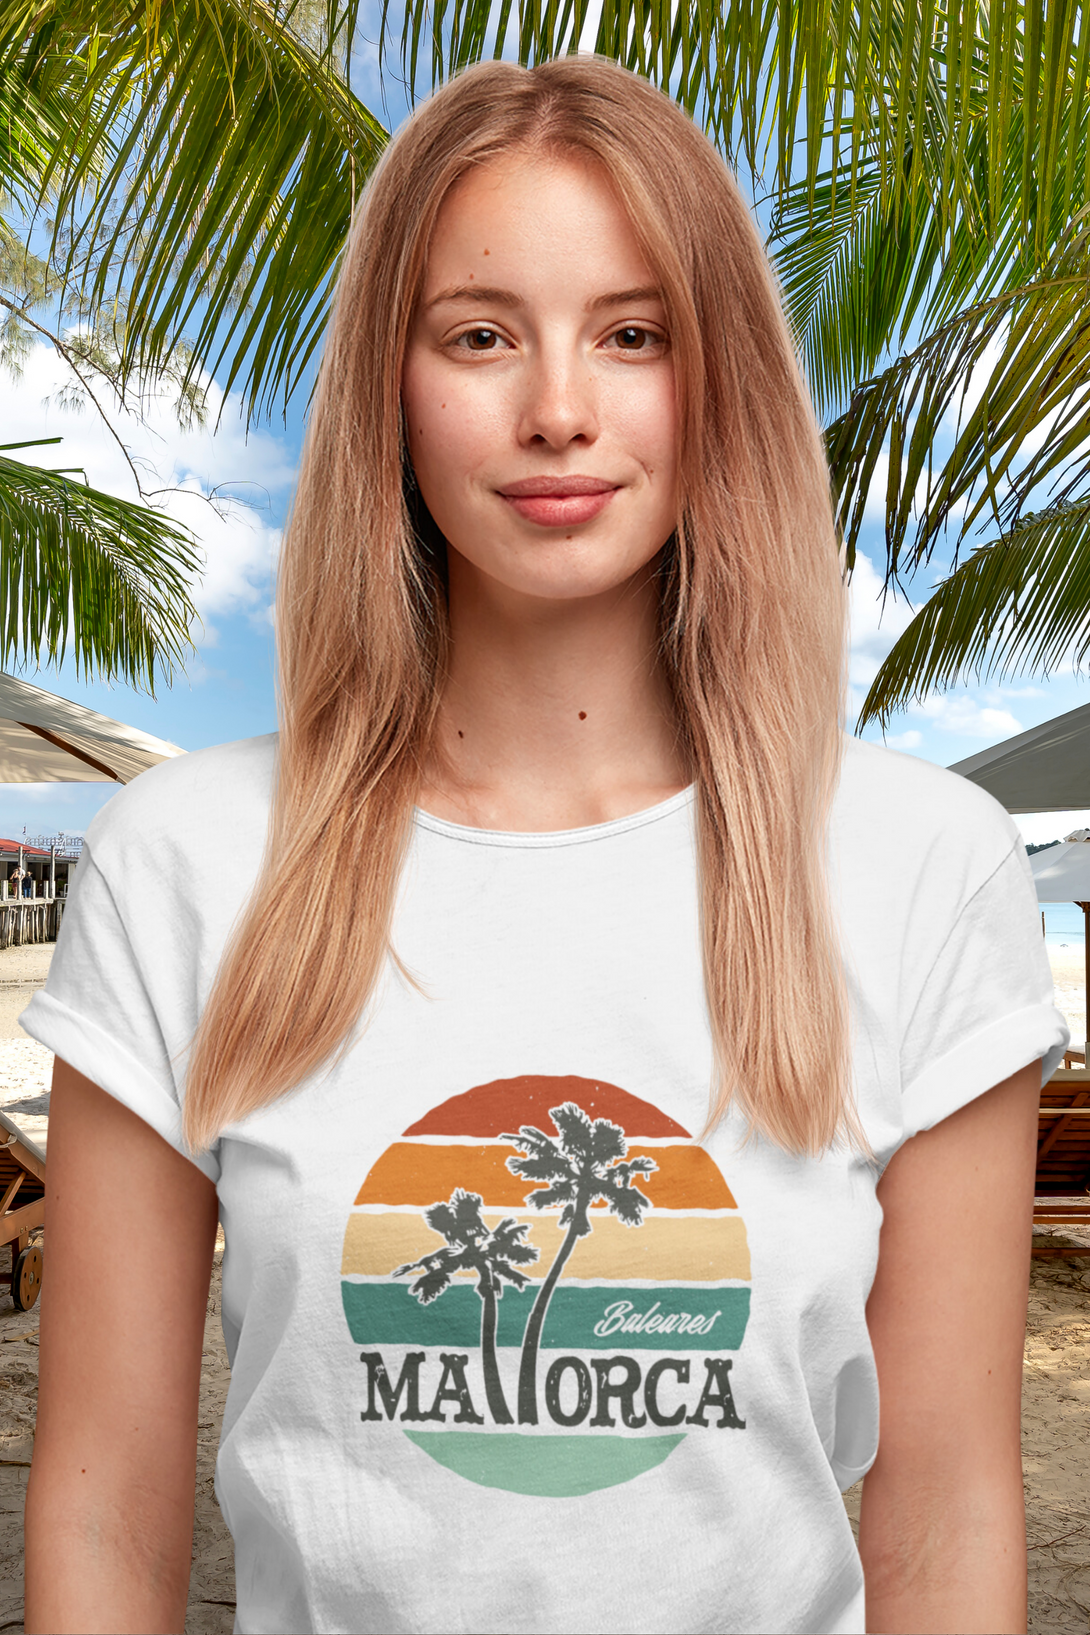 Mallorca And Palm Printed Scoop Neck T-Shirt For Women - WowWaves - 4